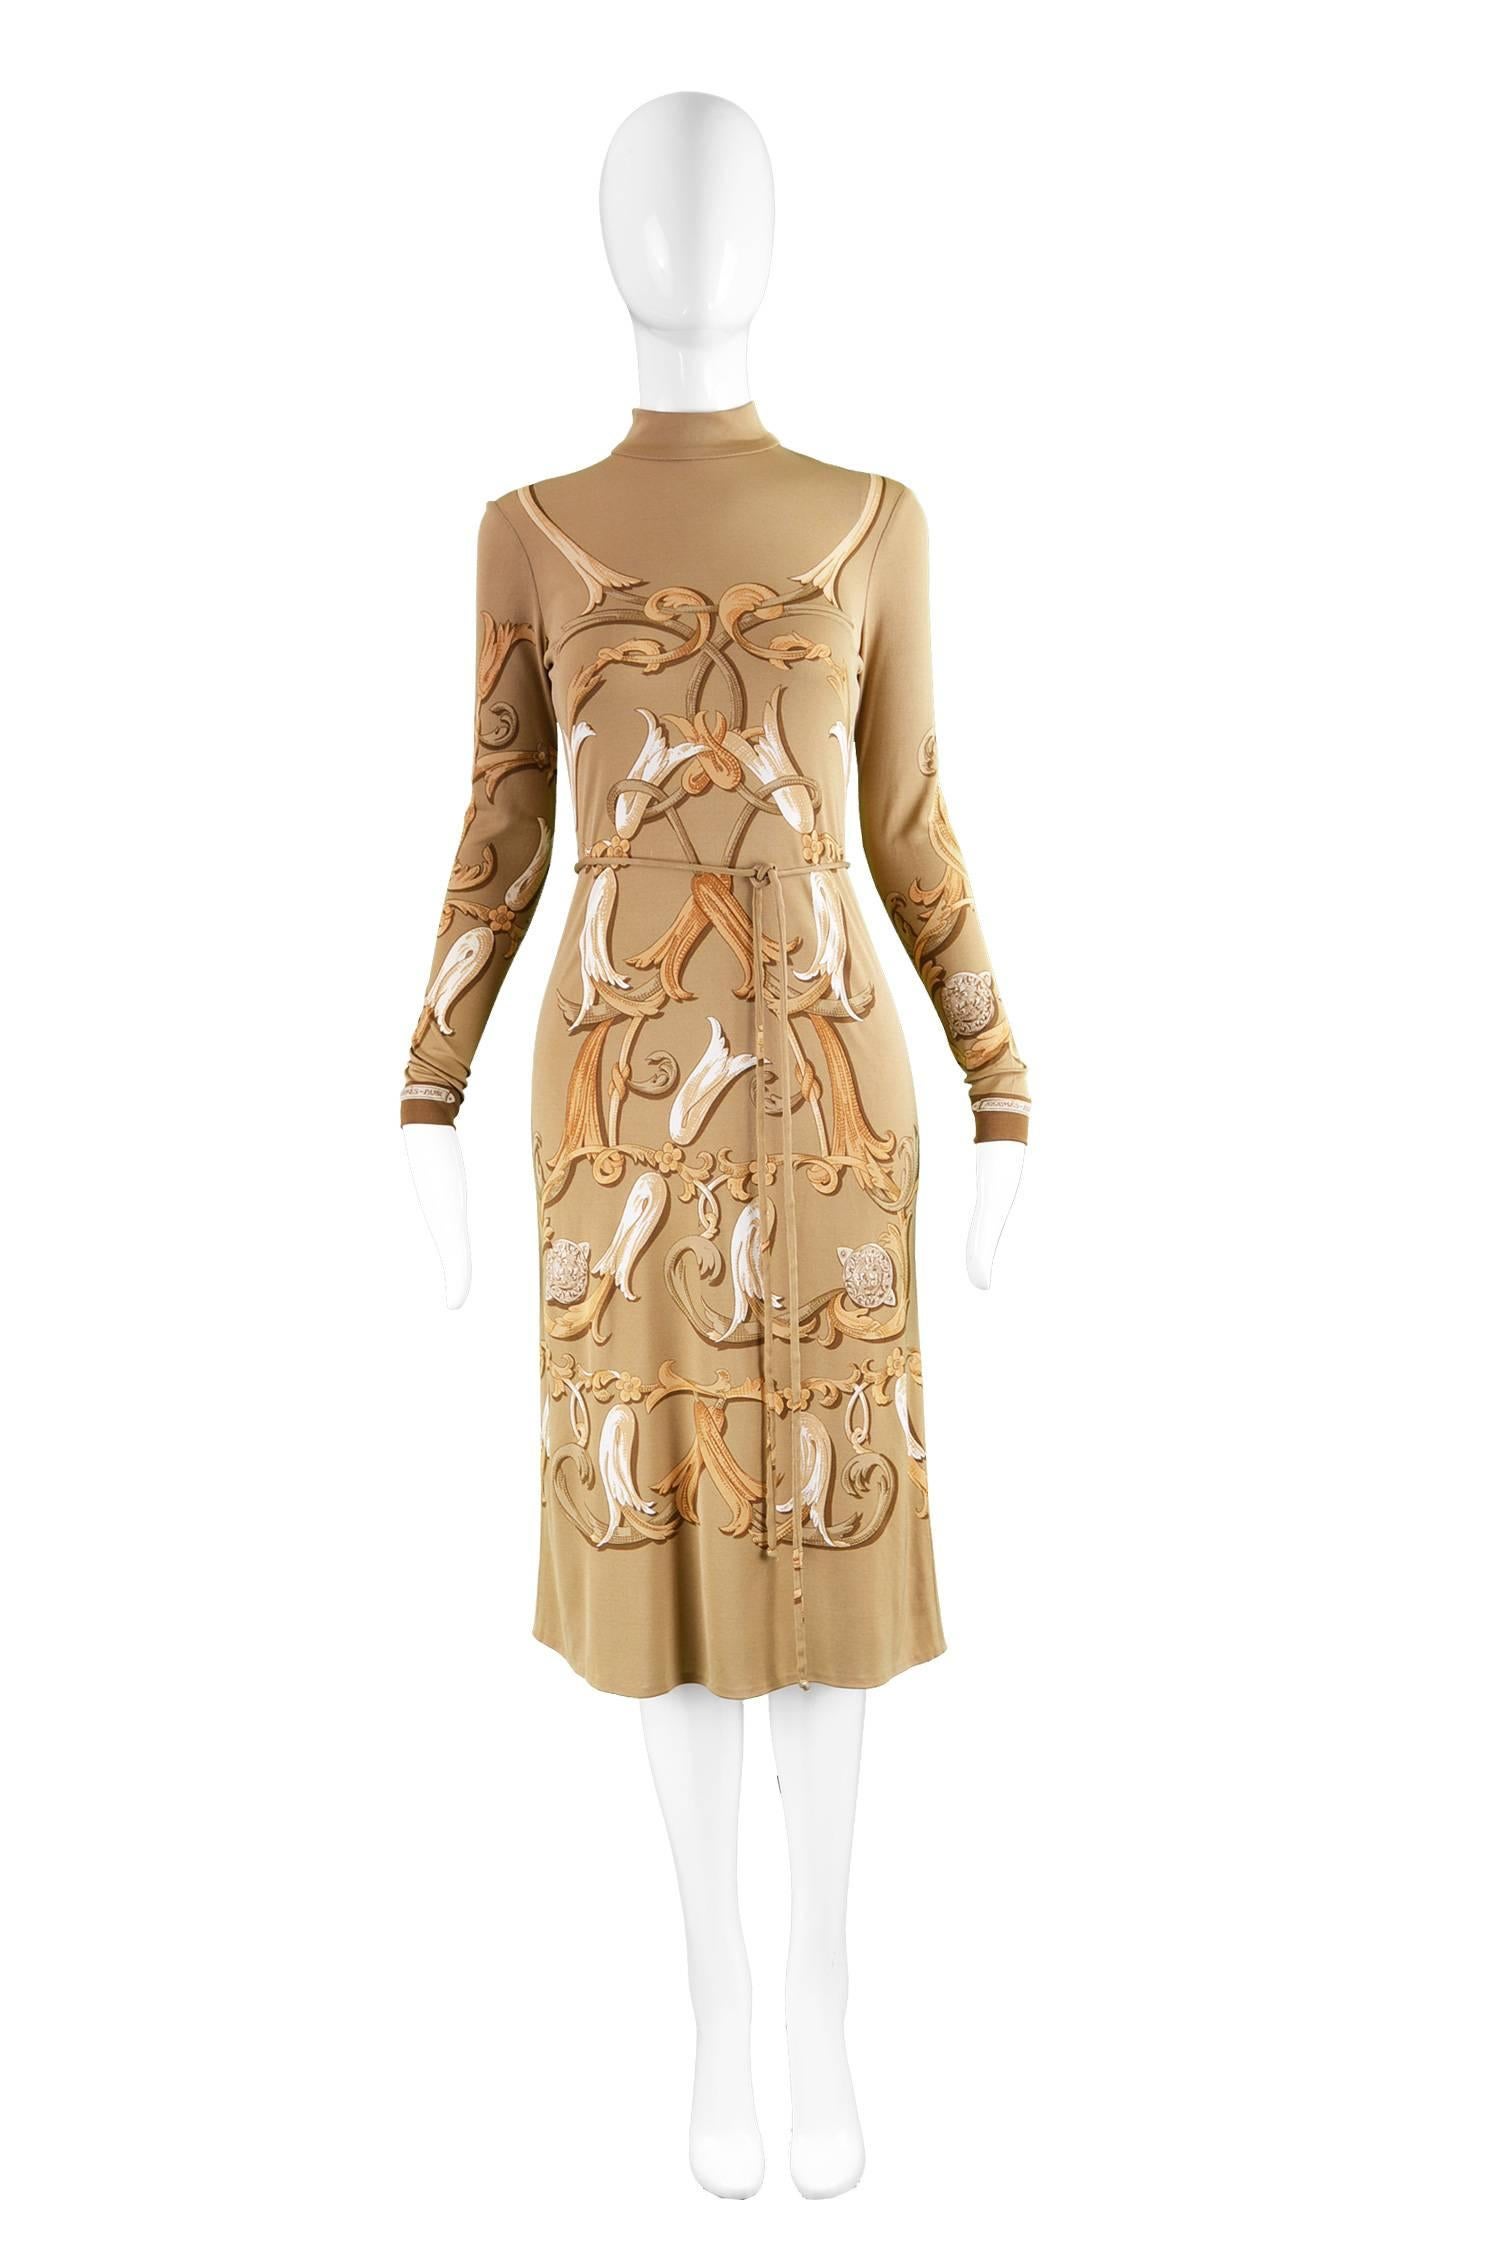 Hermes Paris Vintage Belted Brown Silk Jersey Shift Dress, 1970s

Estimated Size: UK 10/ US 6/ EU 38. Please check measurements to ensure fit
Bust - 34” / 86cm
Waist - 30” / 76cm (can be pulled in with belt)
Hips - 38” / 96cm
Length (Shoulder to